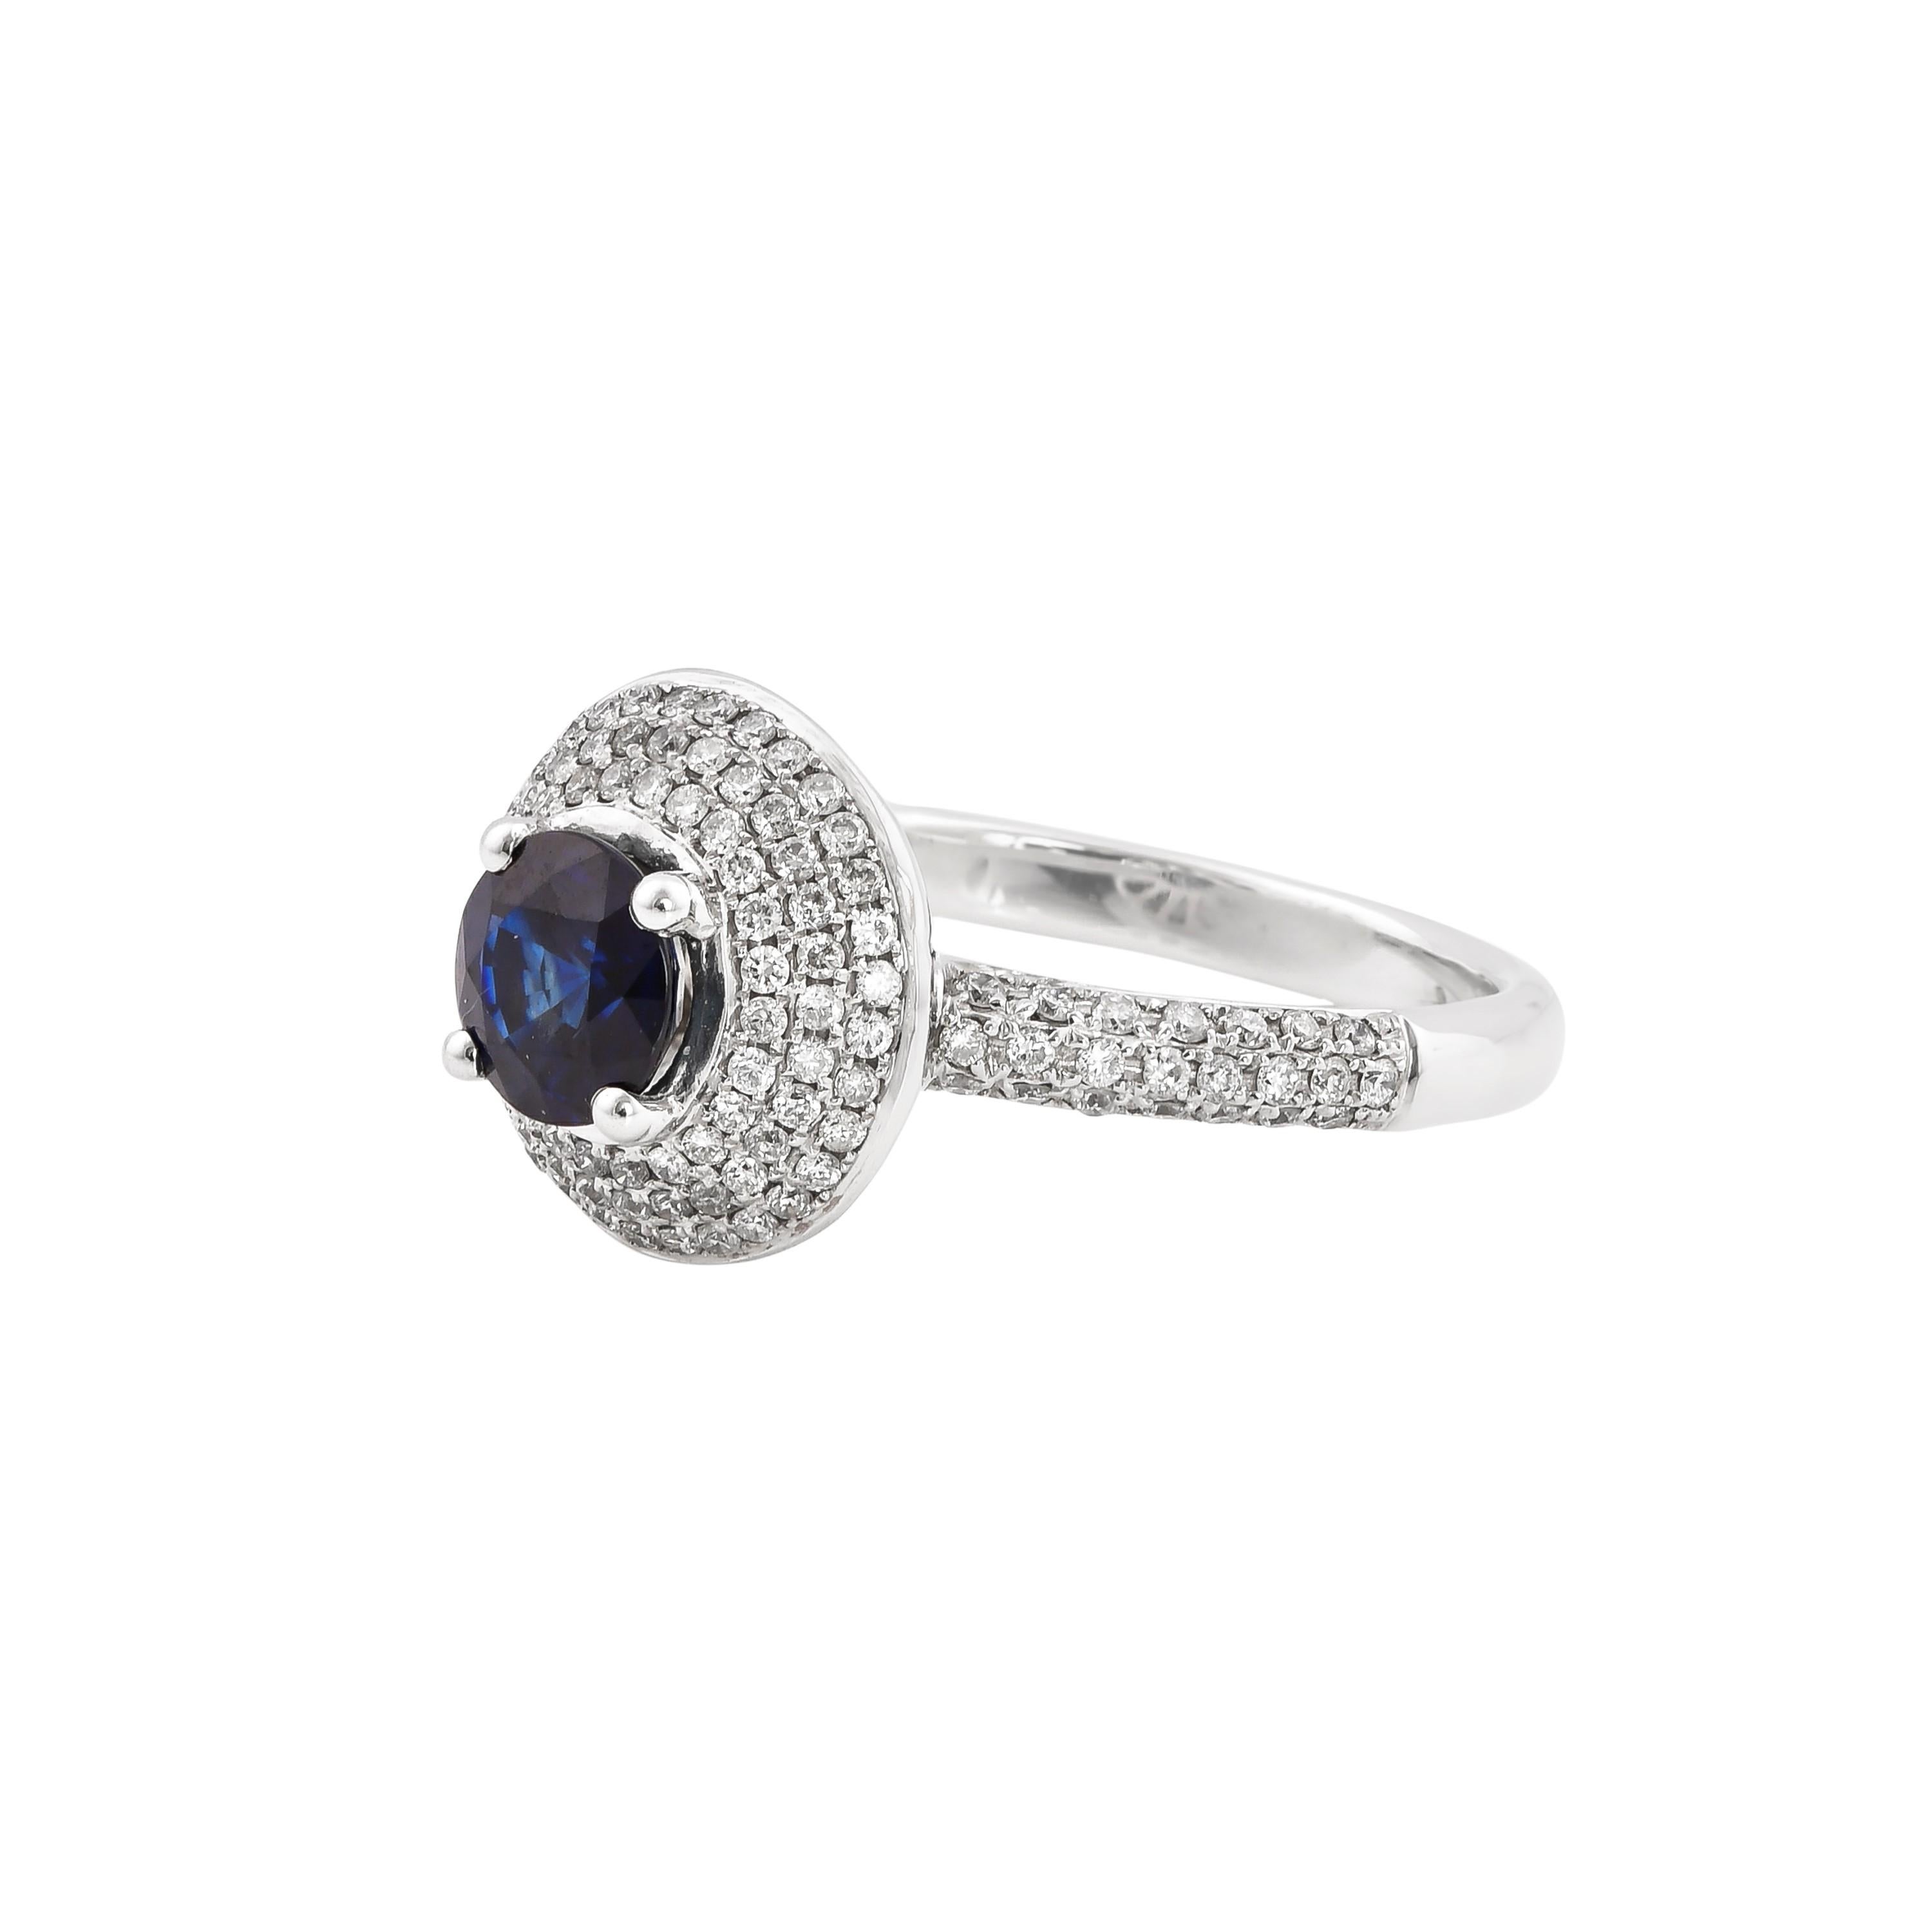 Contemporary 1.0 Carat Blue Sapphire and White Diamond Ring in 14 Karat White Gold For Sale